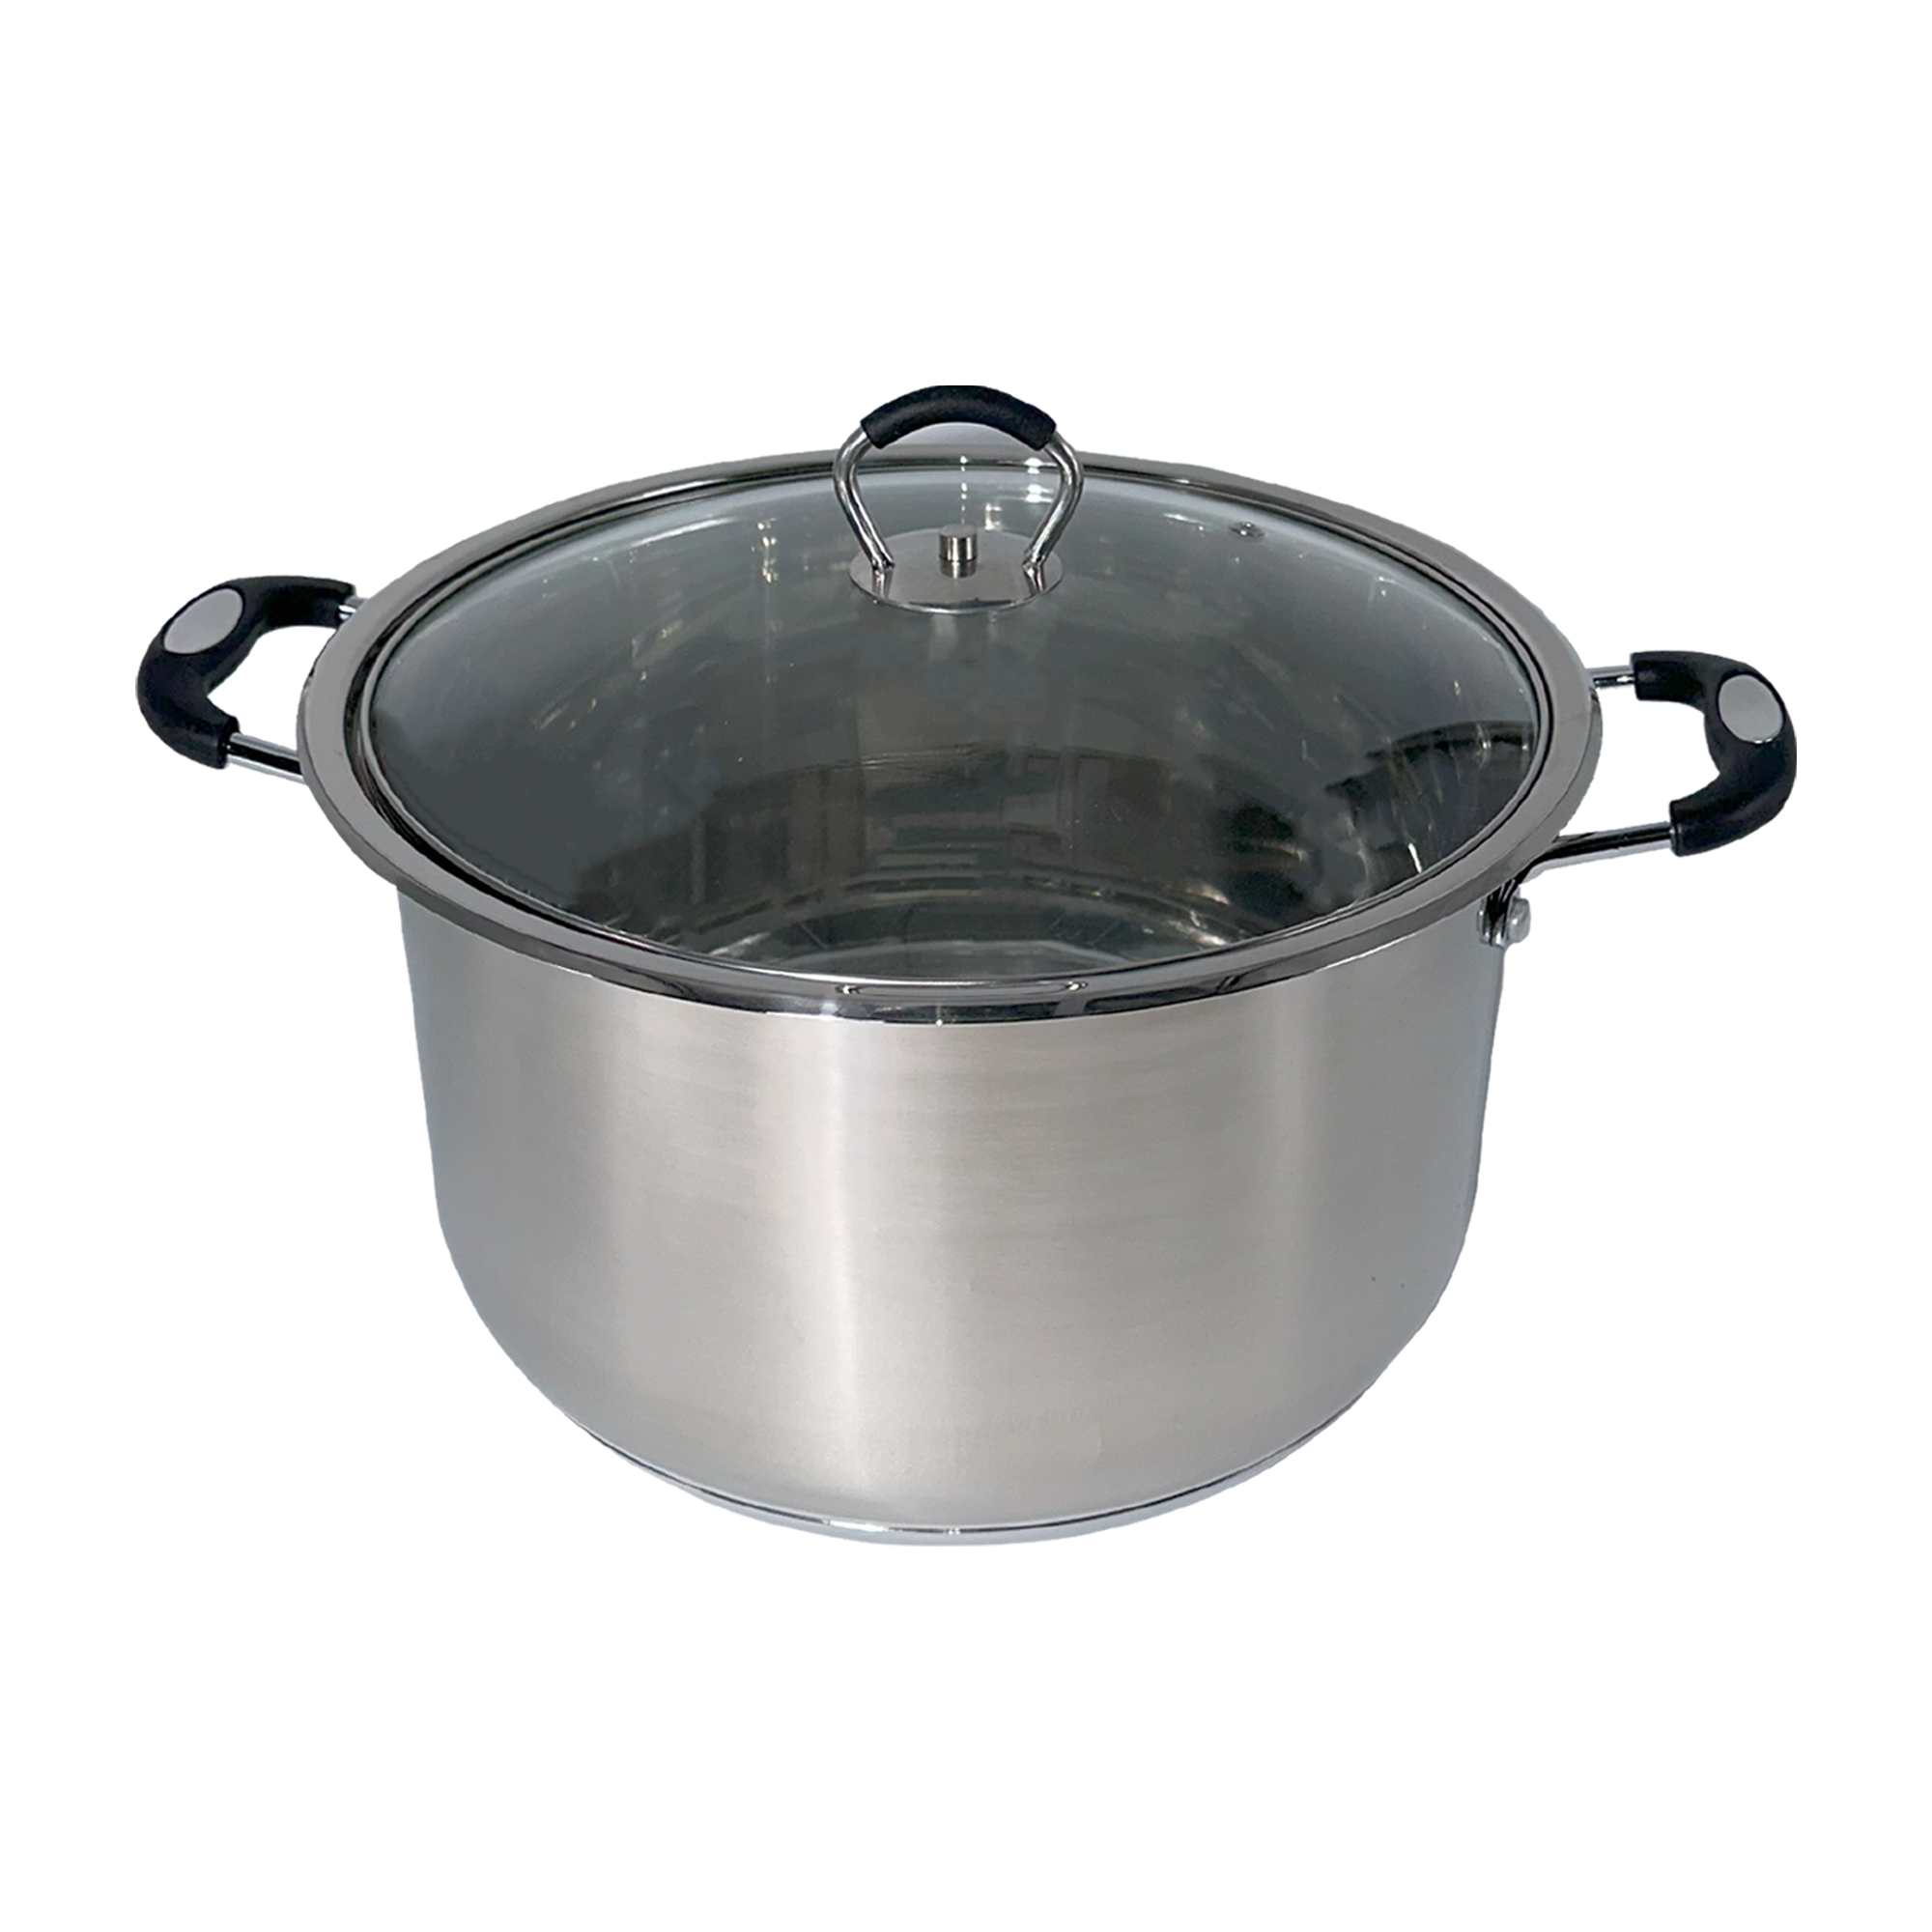 Glaxa Stainless Steel Induction Base Casserole/Pots With Lid - 32cm